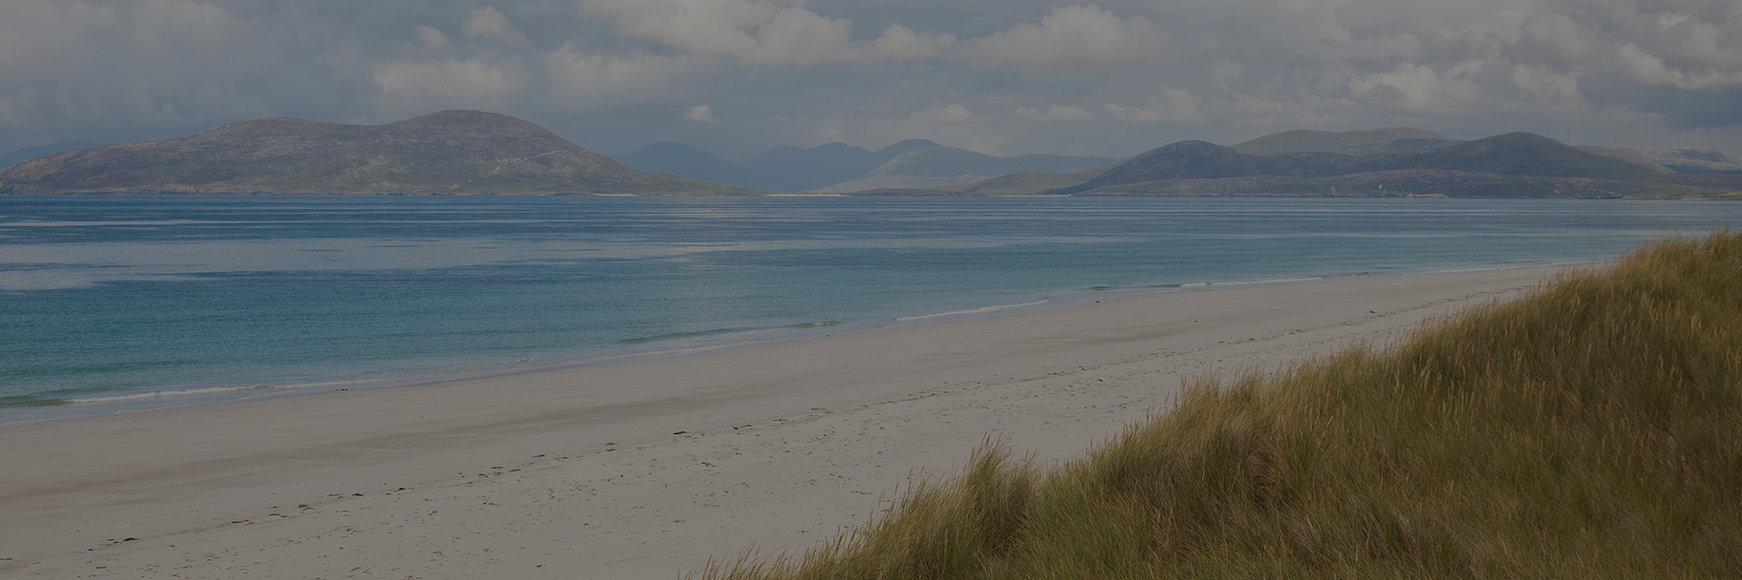 Top 5 beaches to visit in Scotland banner image